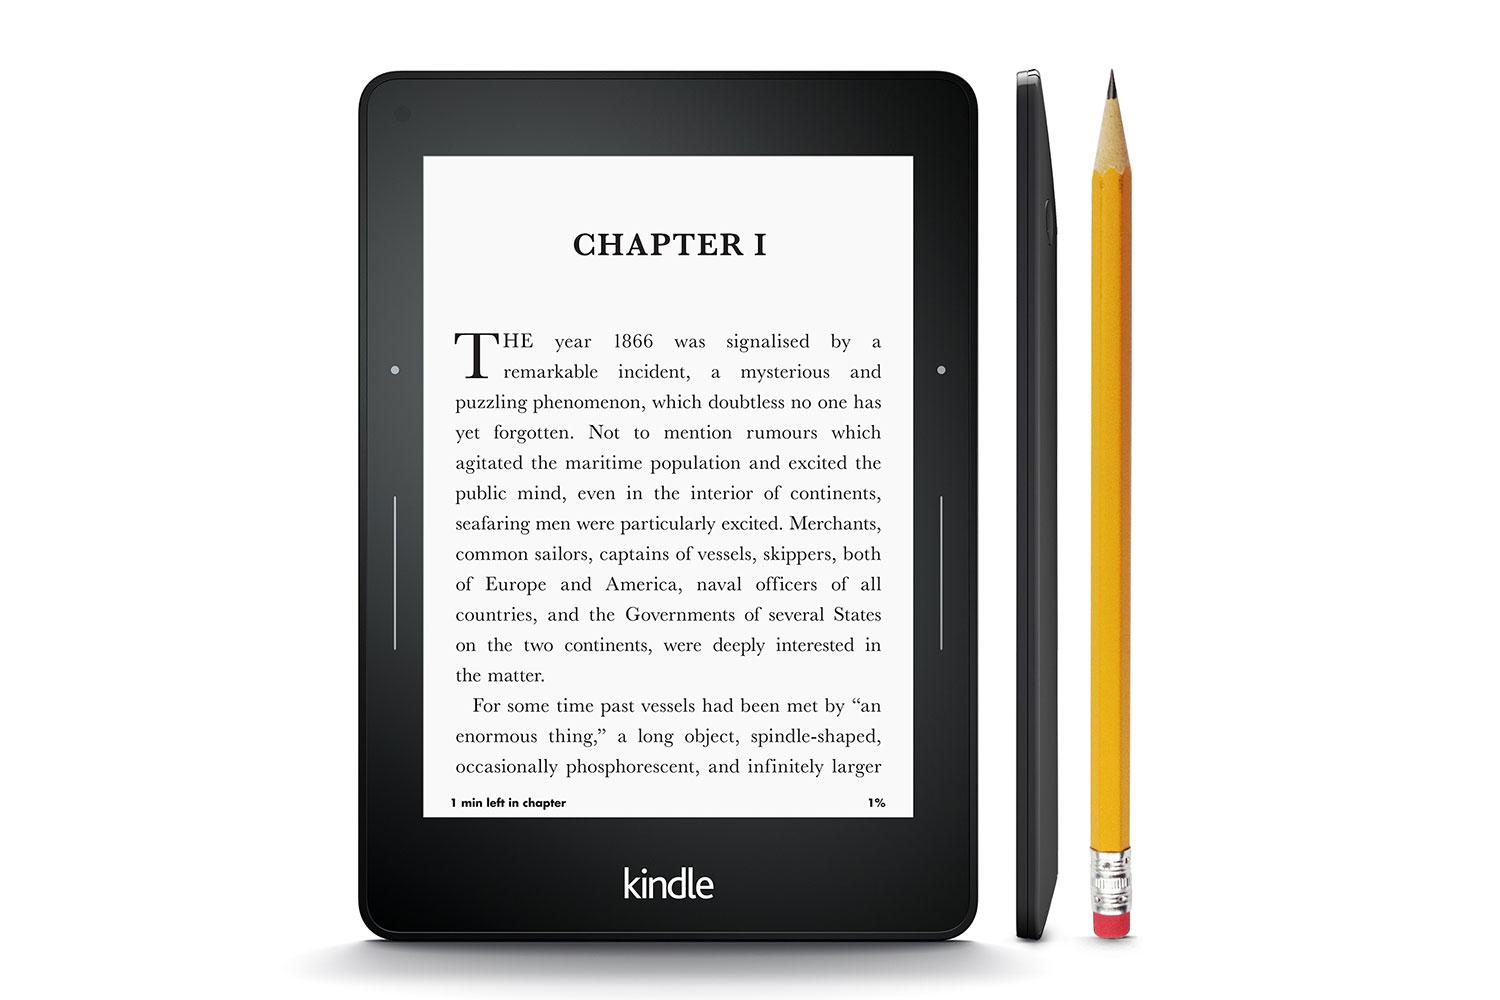 amazon launches high end voyage e reader kindle thin press image